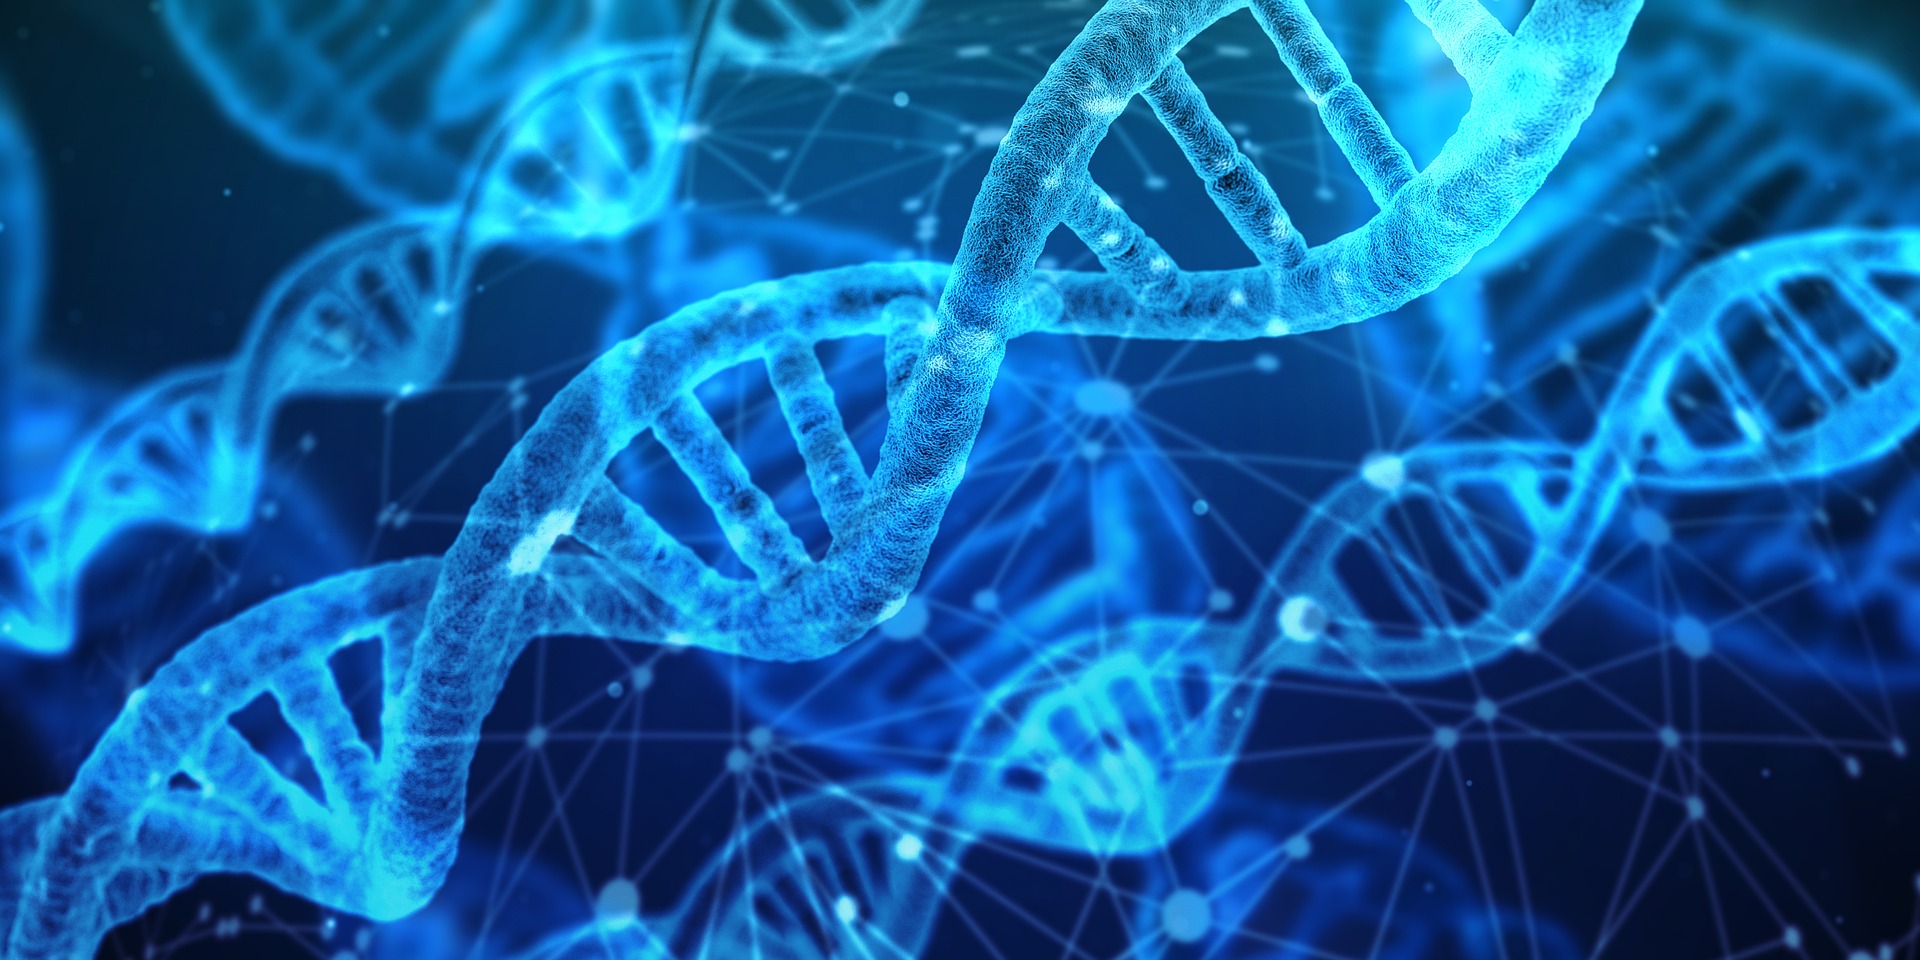 Black background with picture of DNA strands in blue.